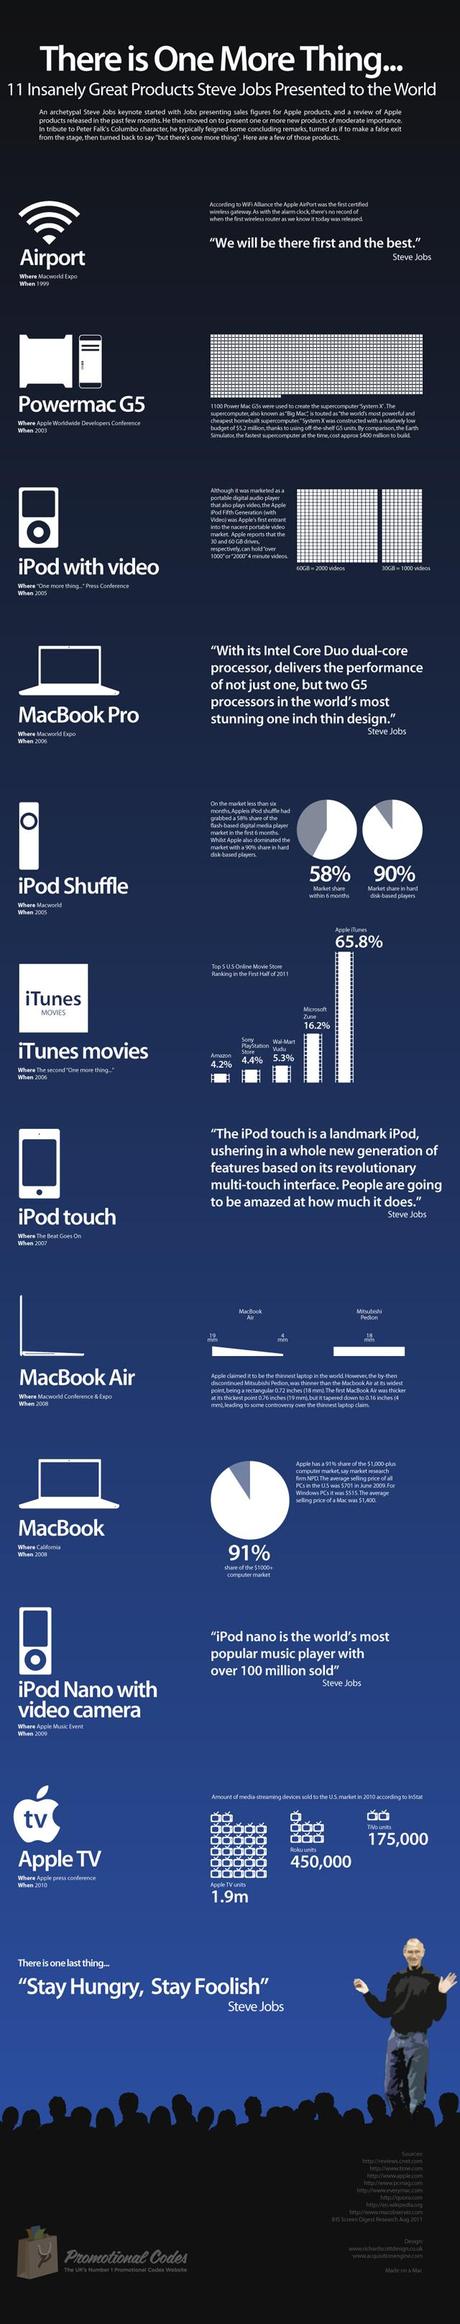 one more thing L’infographie des « One more thing » de Steve Jobs 